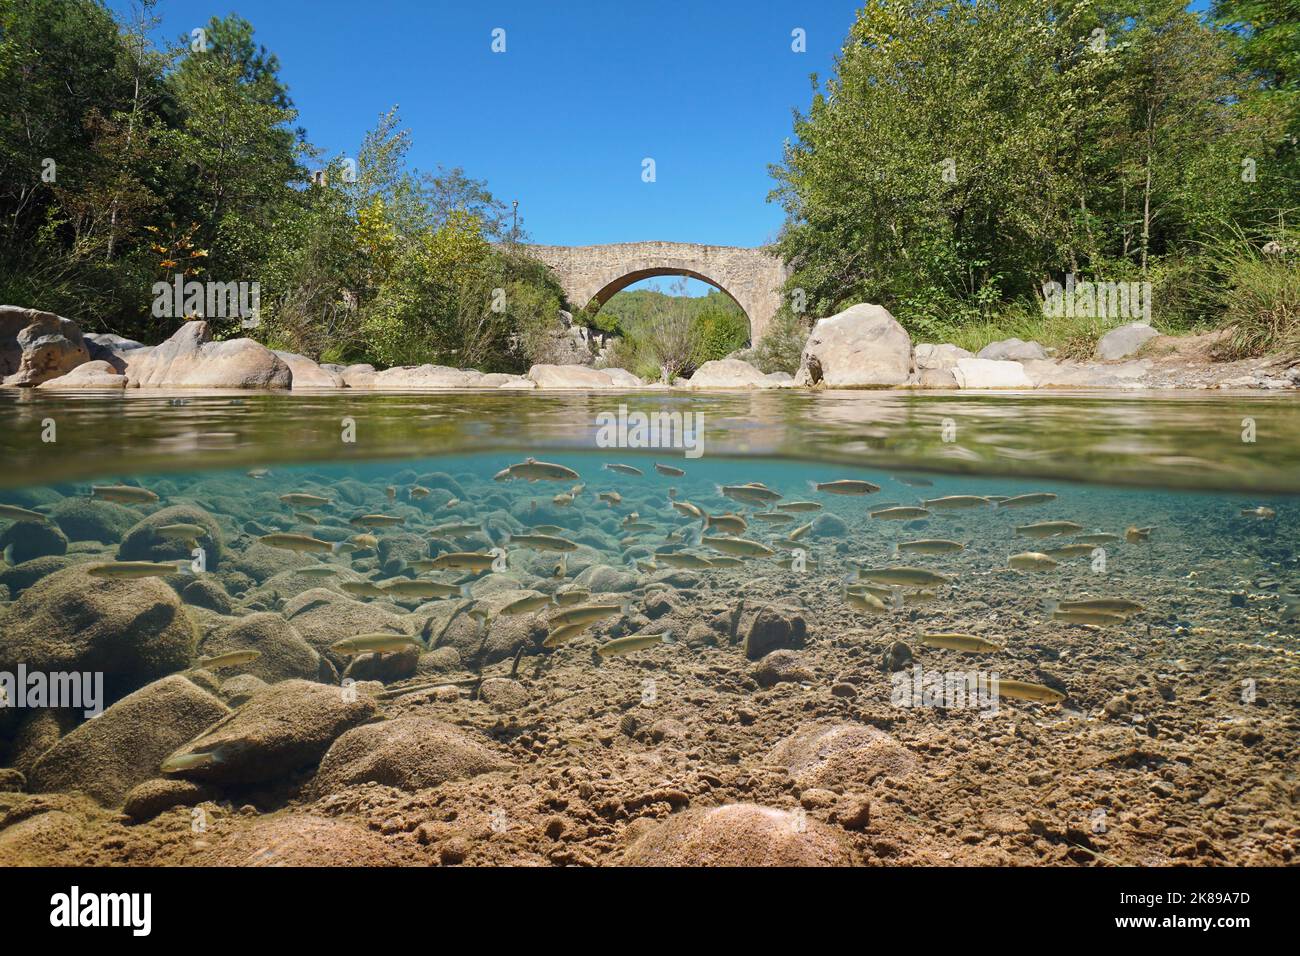 River with a stone bridge and a shoal of fish underwater (chub fish), split level view over and under water surface, Catalonia, Spain Stock Photo